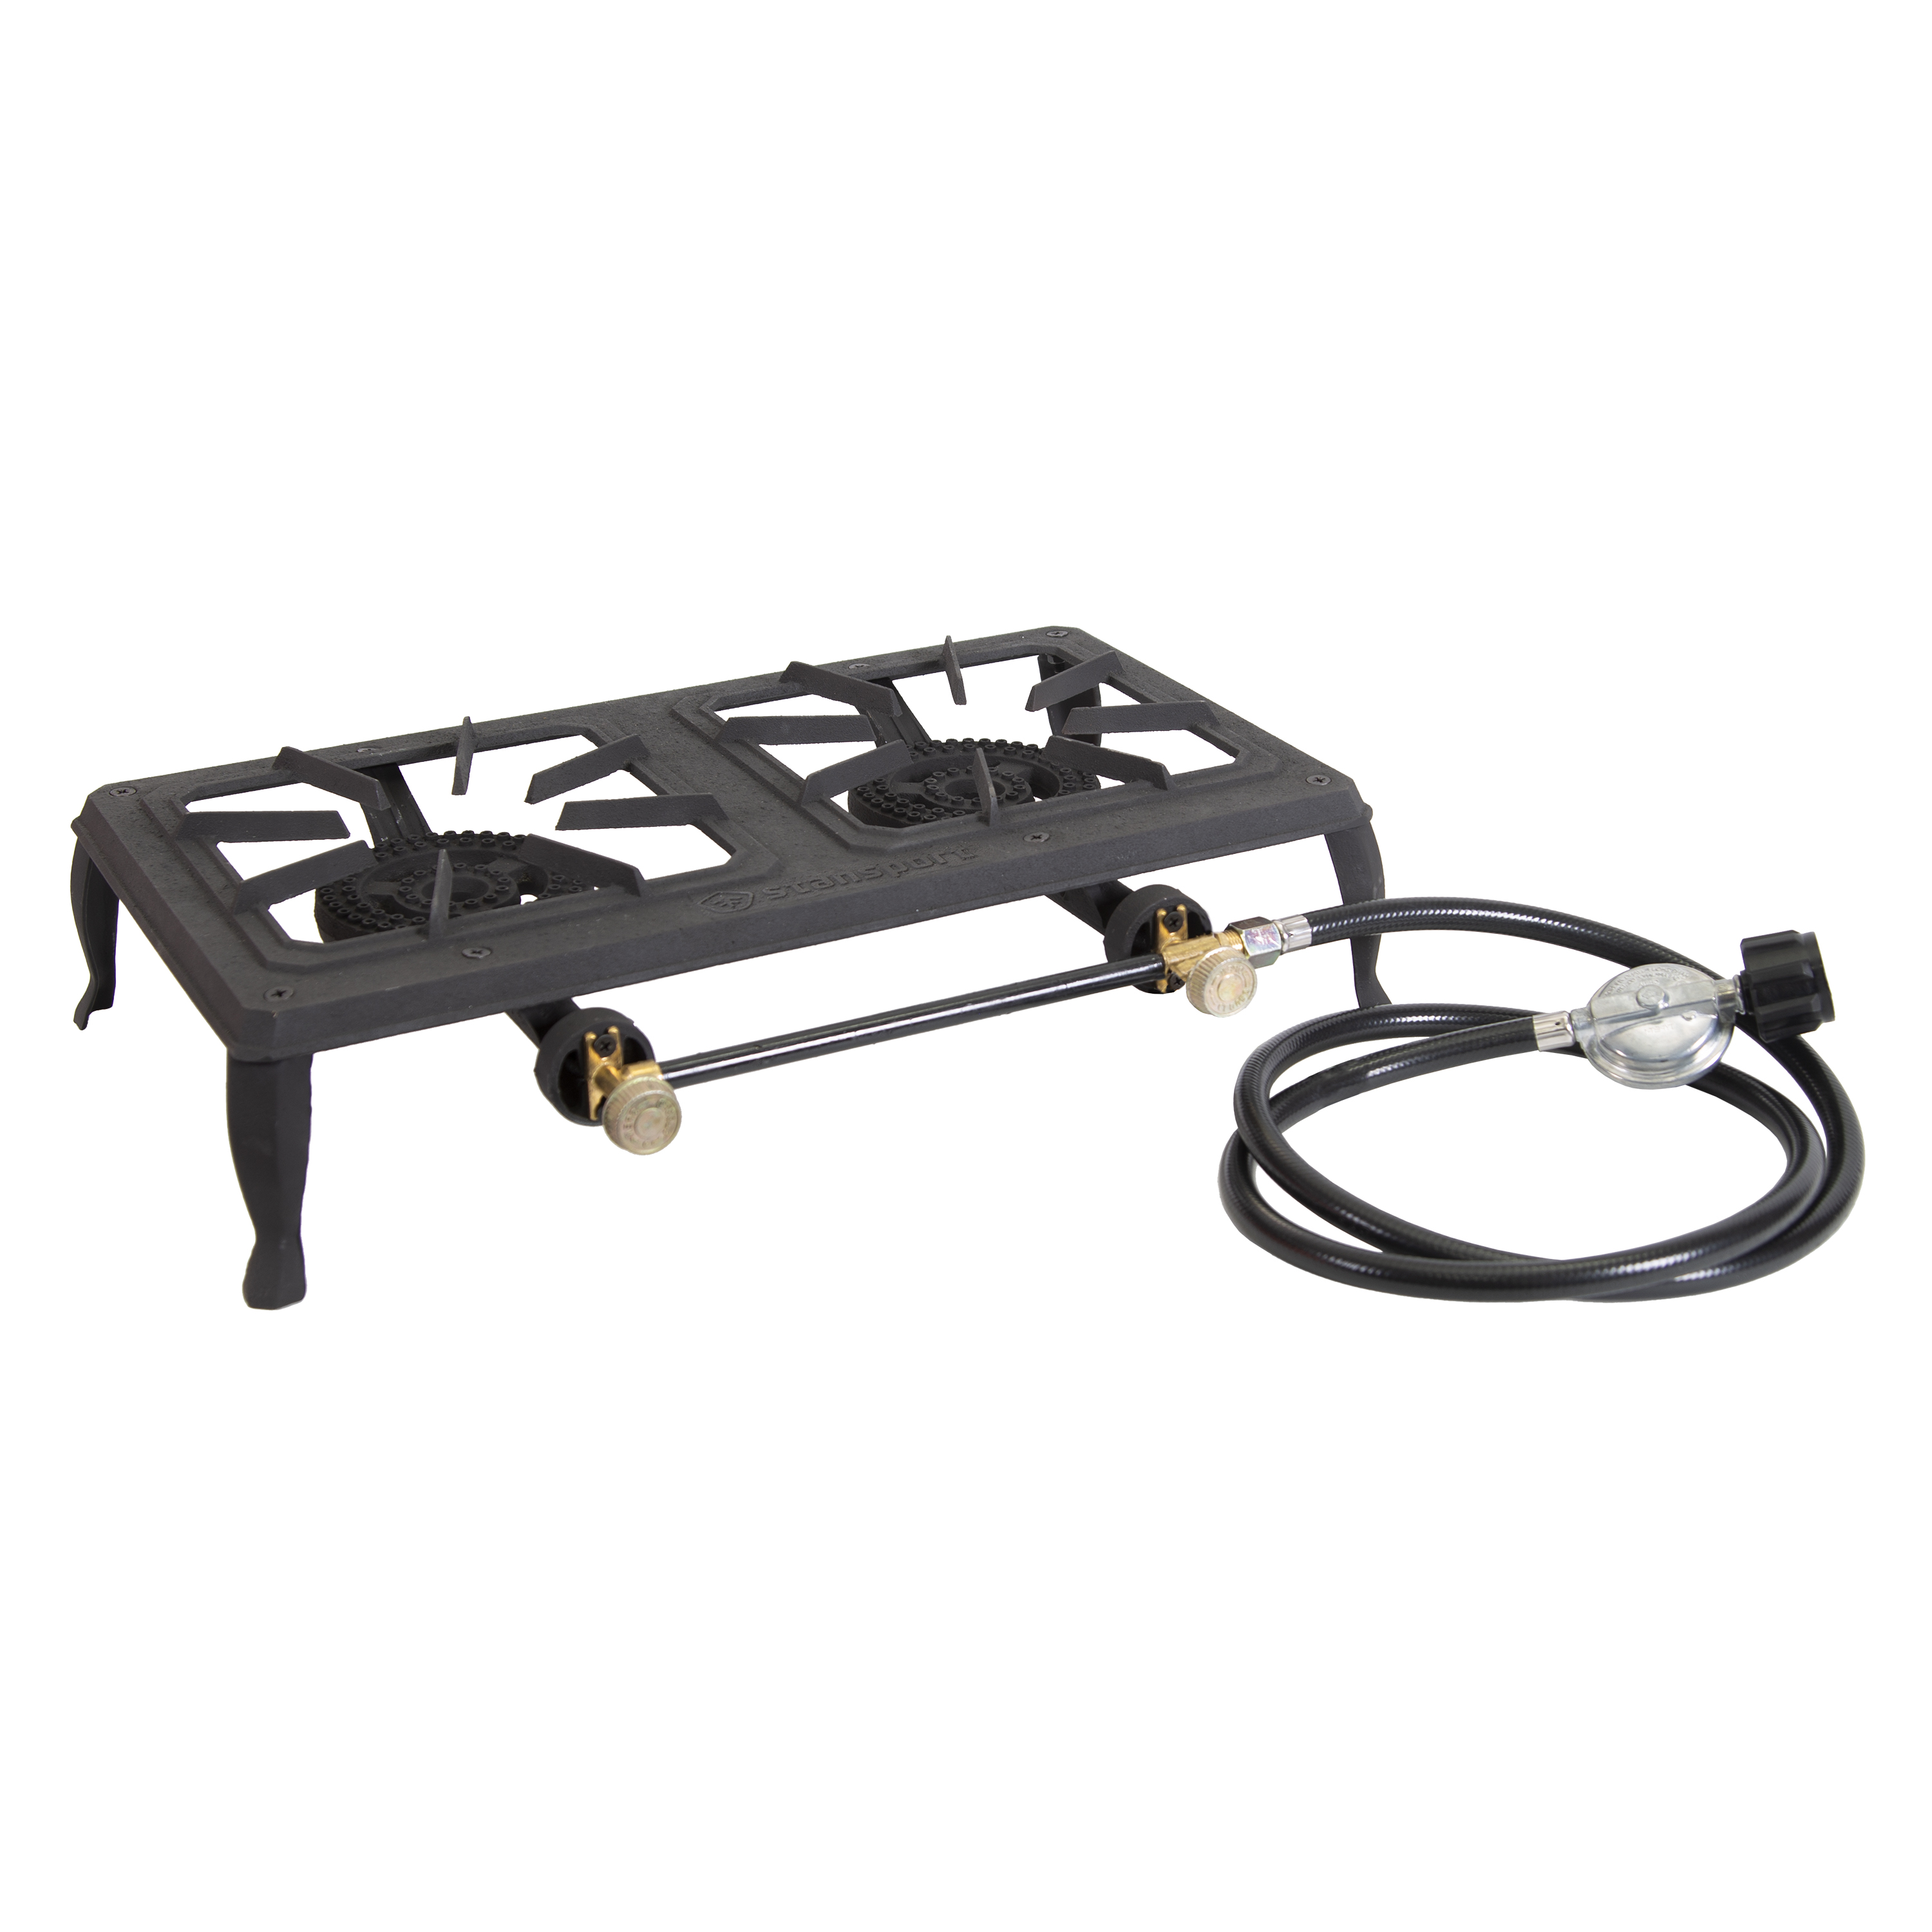 Stansport 209-100 Double Burner Cast Iron Stove with Regulator Hose - 2 Burners For Propane Use - image 1 of 6